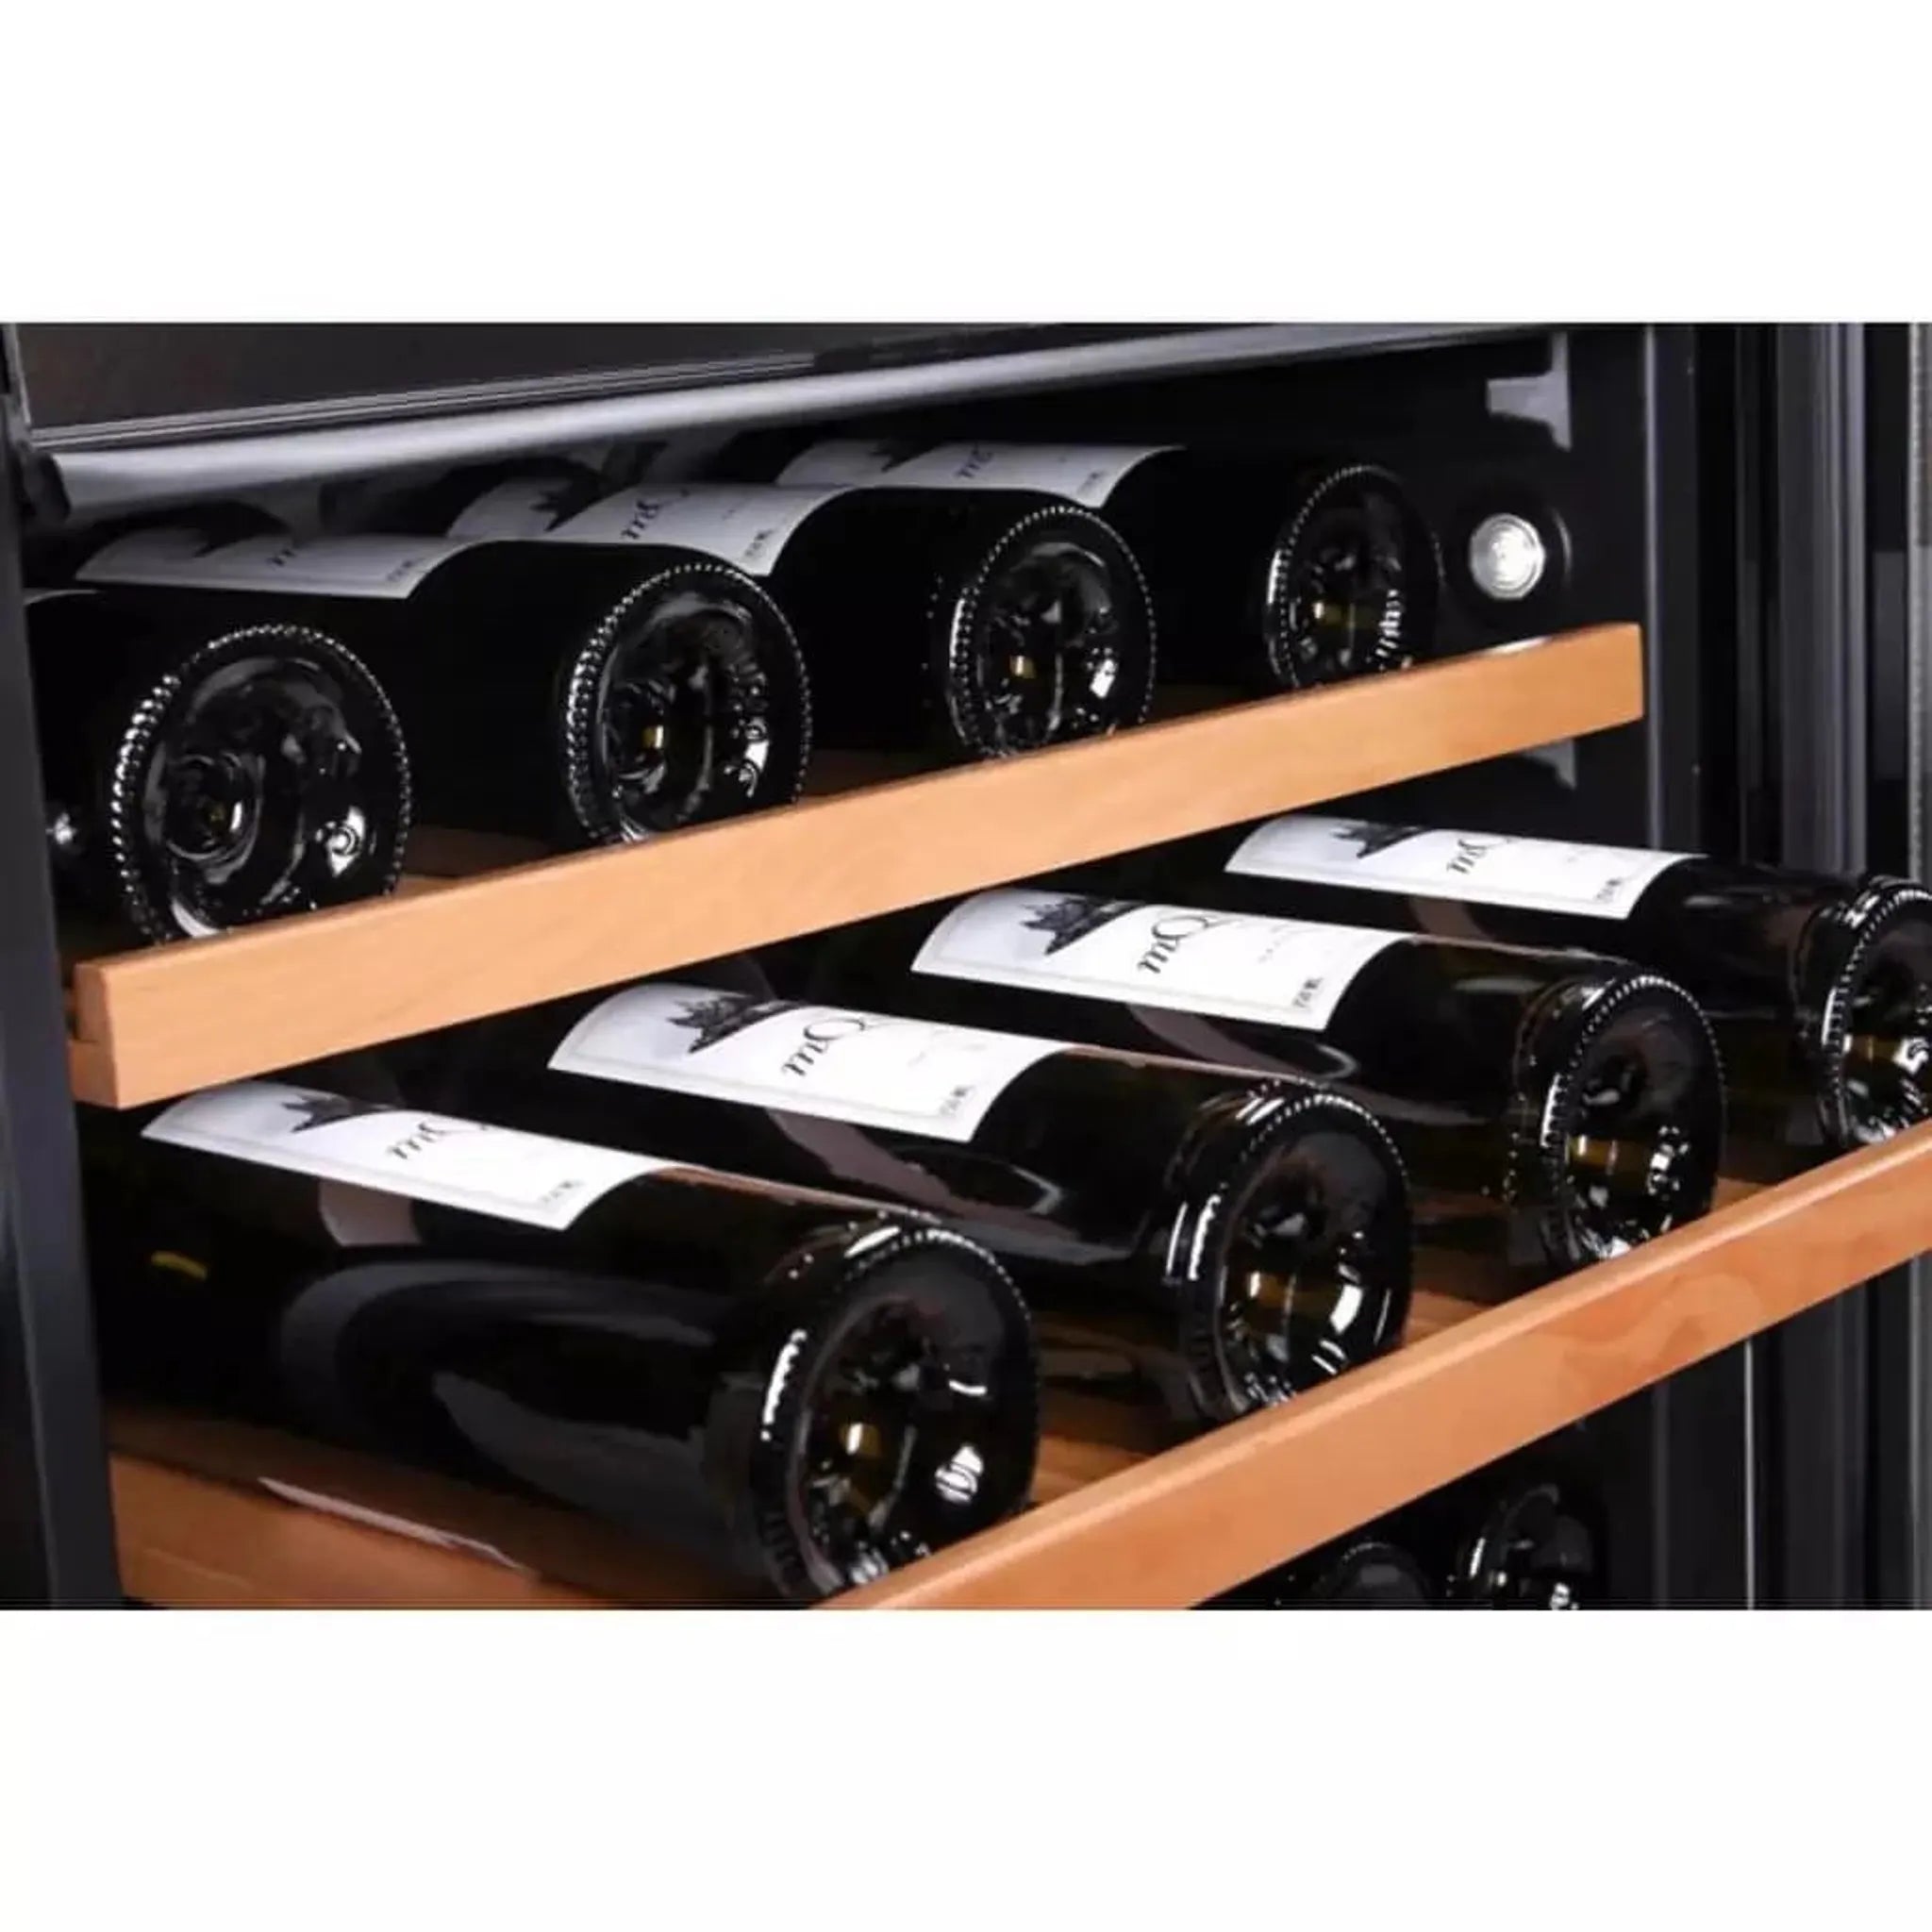 mQuvée - 600mm - Undercounter Wine Fridge - WineCave 720 60D Stainless